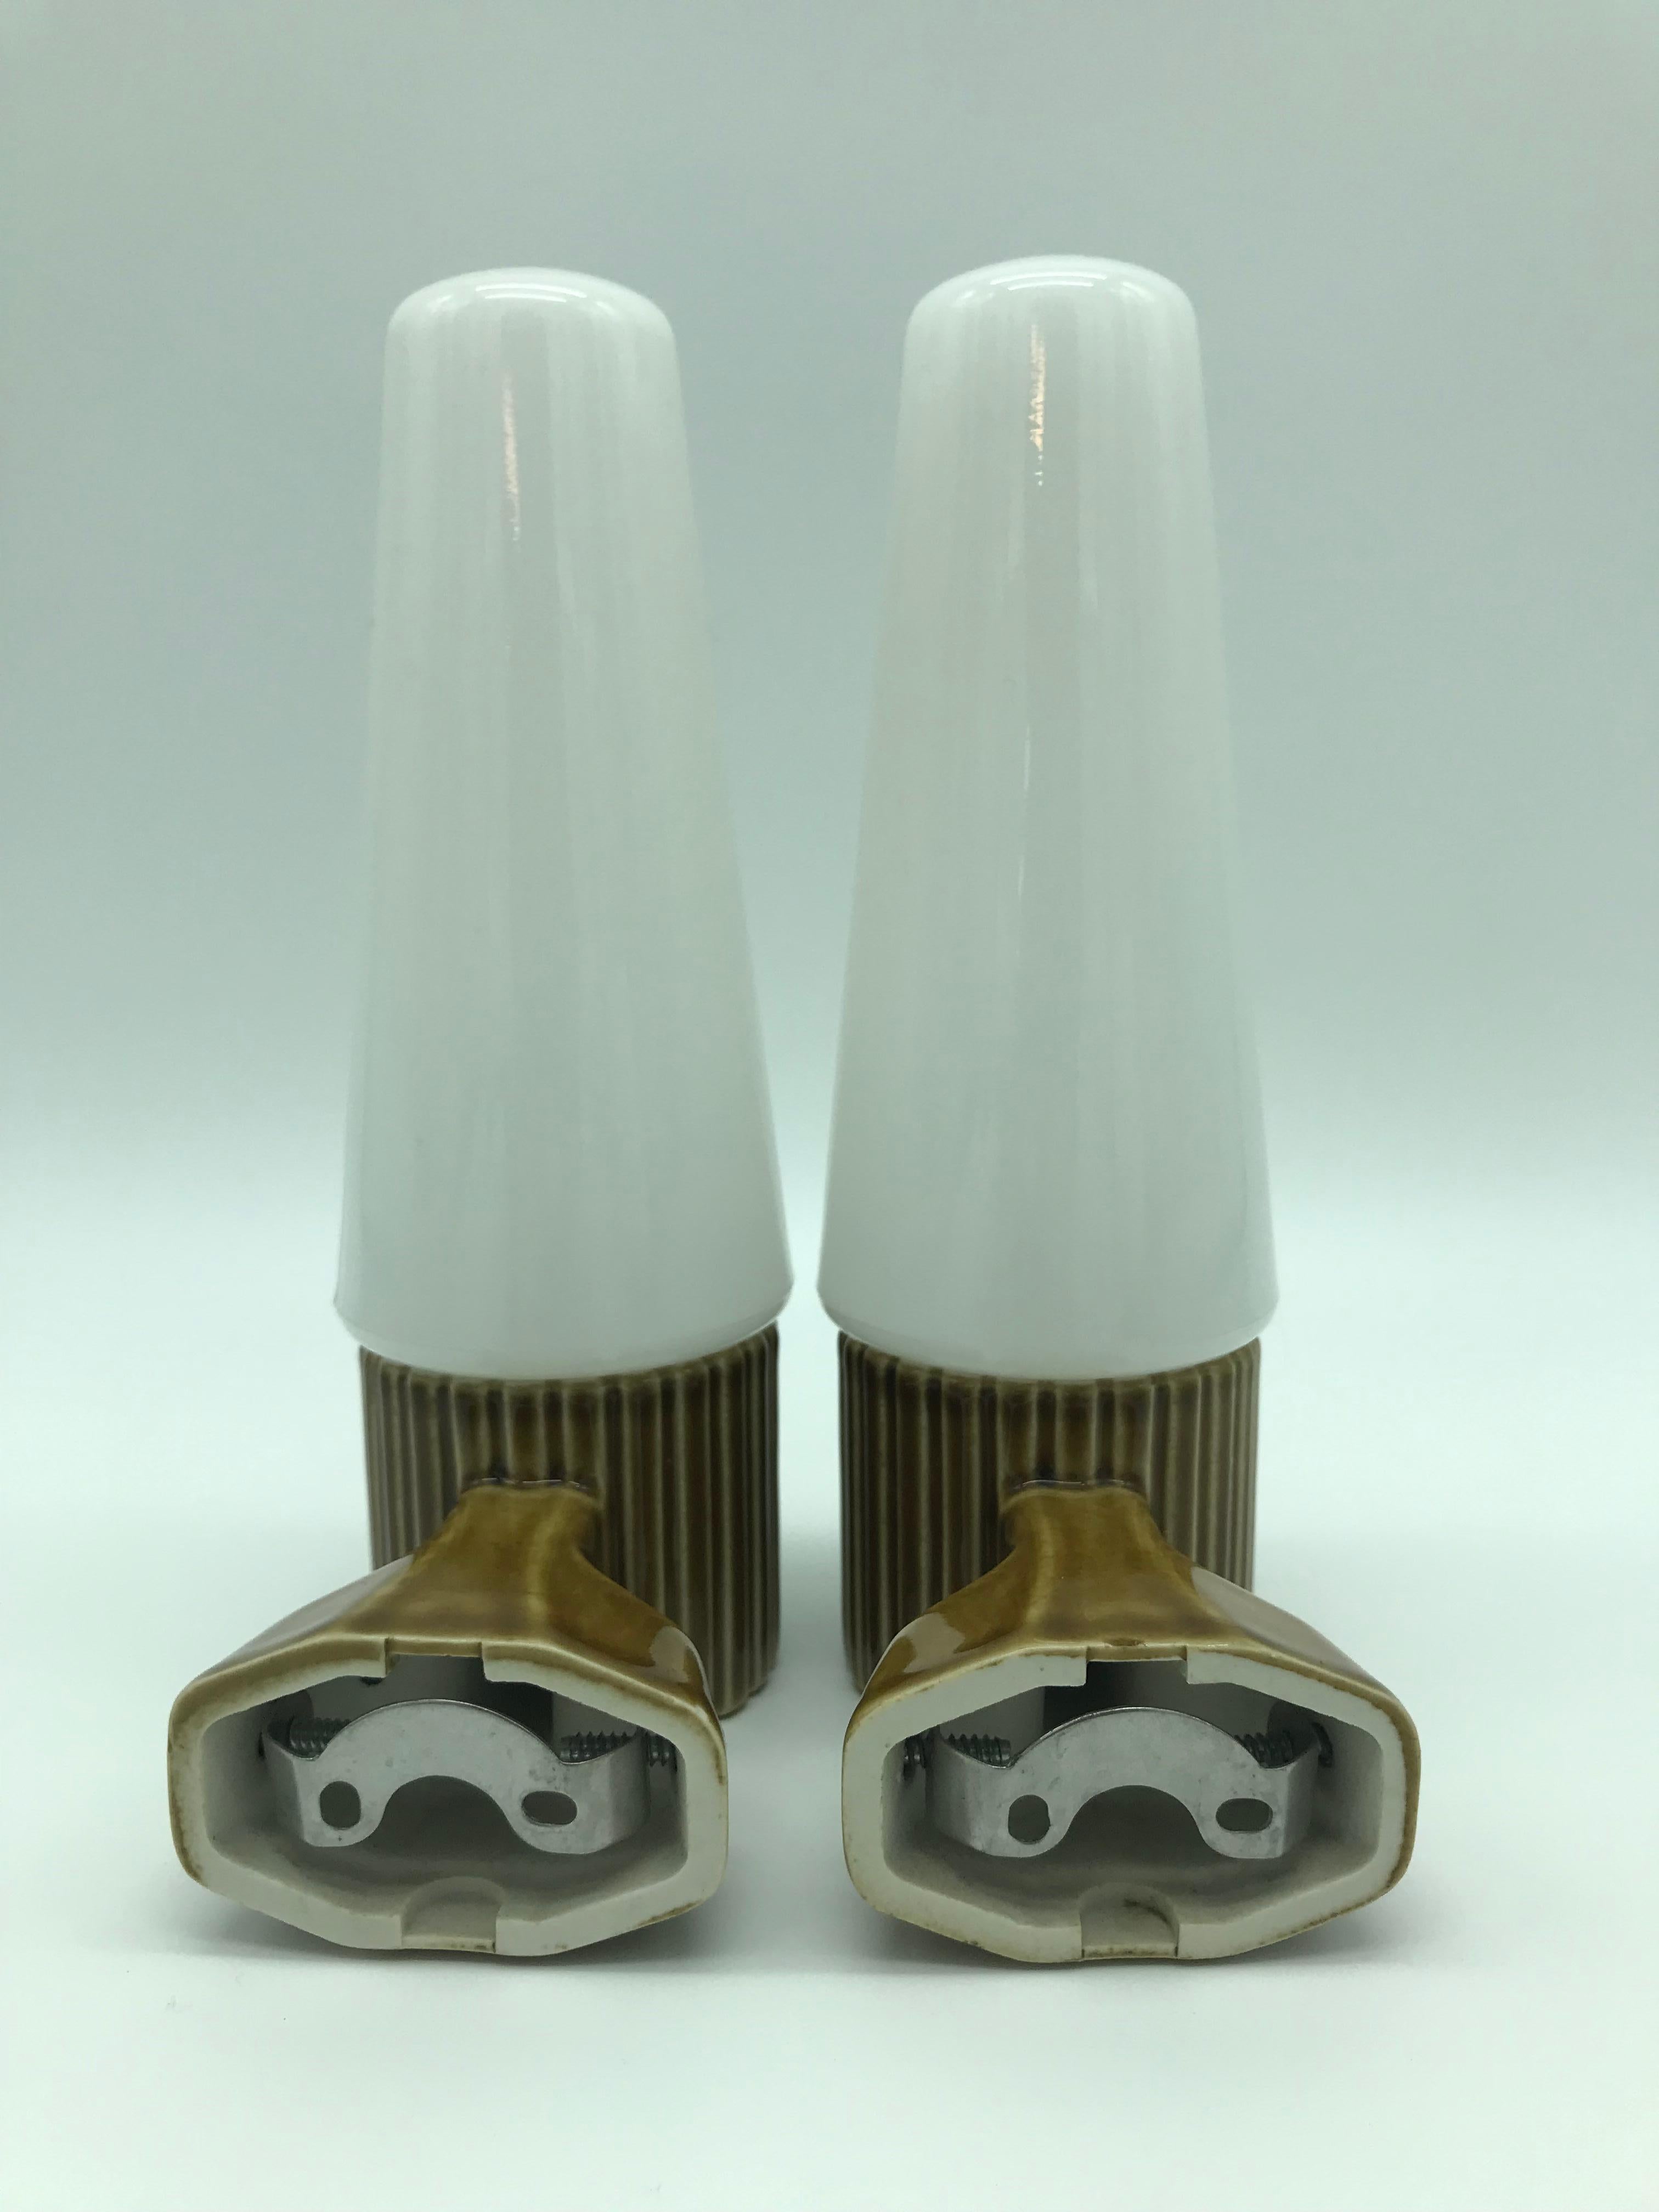 Mid-Century Modern Vintage Ifö of Sweden Ceramic Bathroom Lamps with Opaline Shades from the 1960s